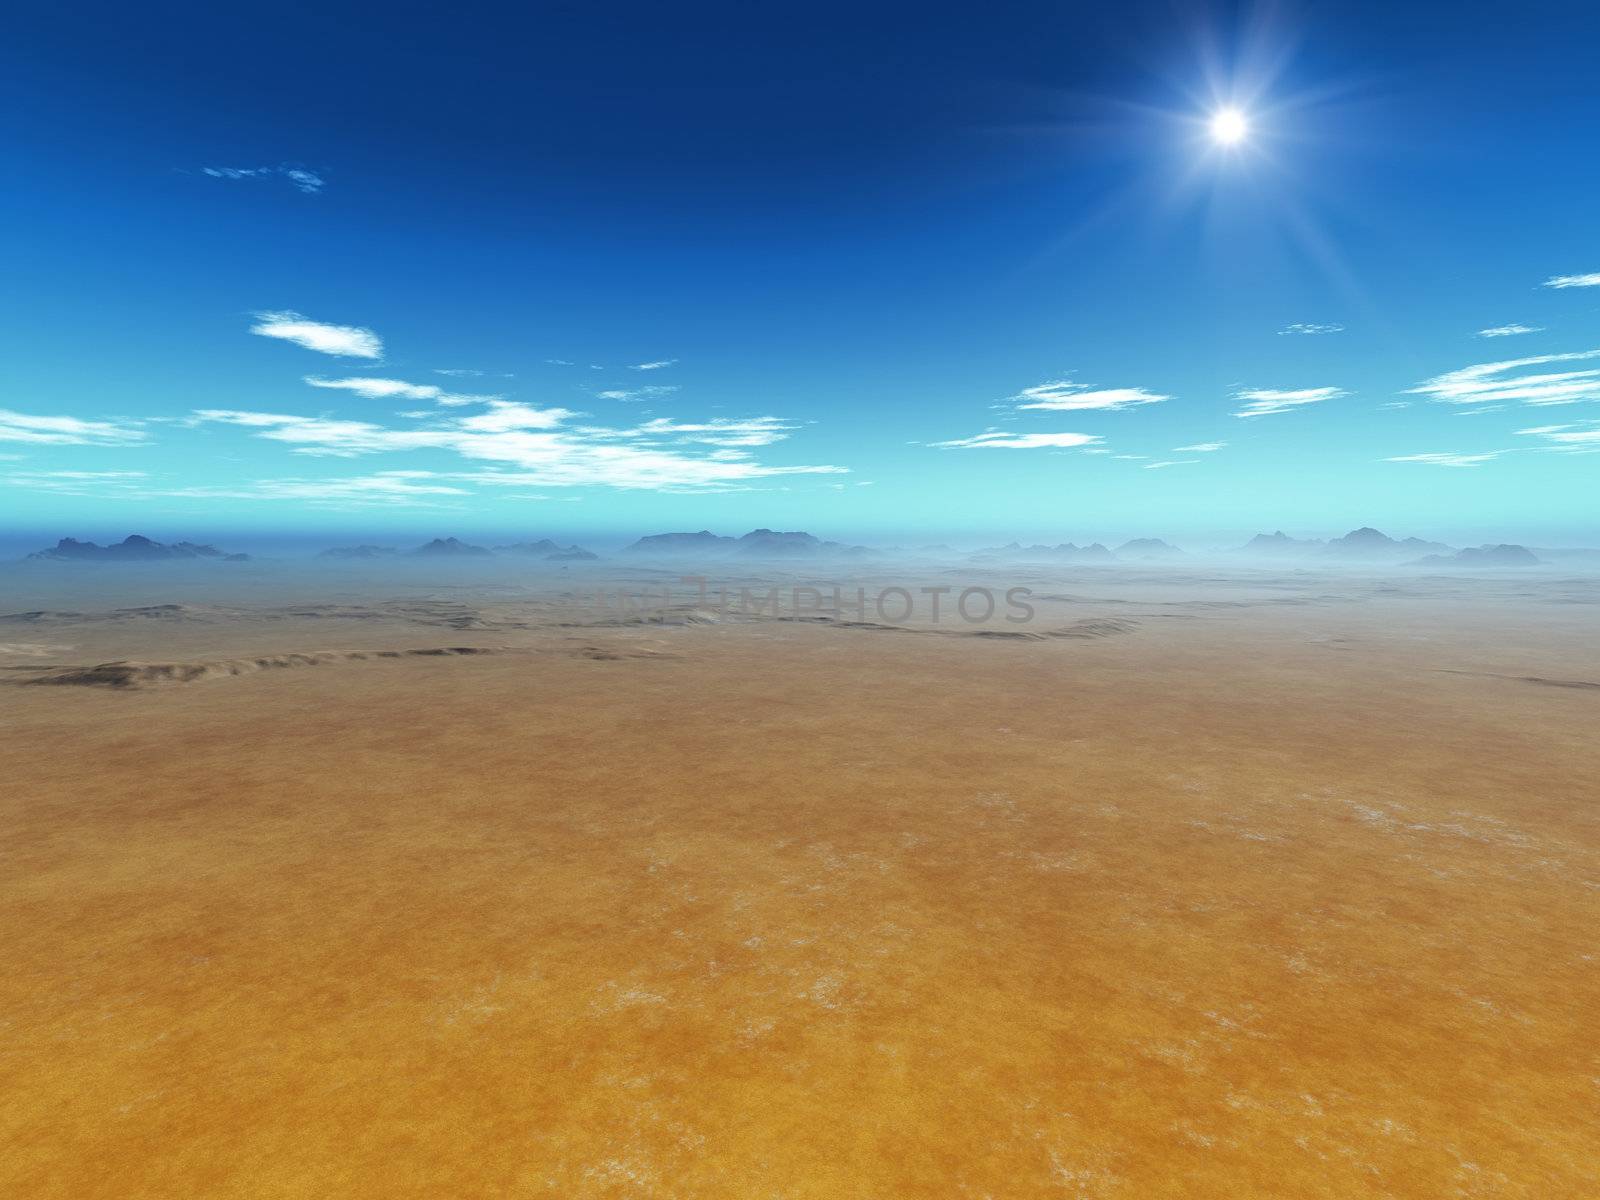 An image of a beautiful red desert and a blue sky